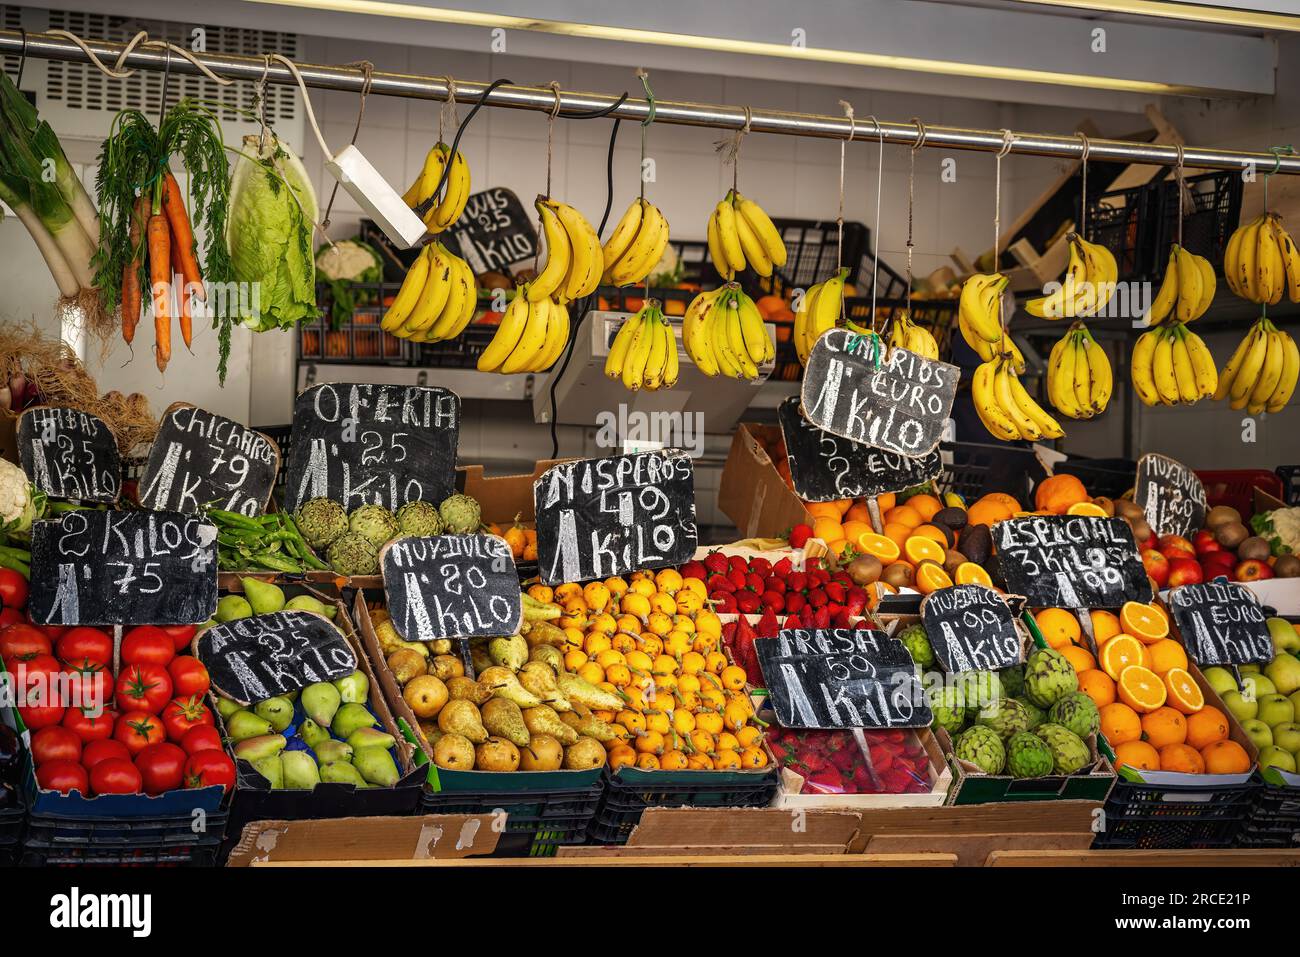 Fruit and Vegetables Market Stall in Spain Stock Photo